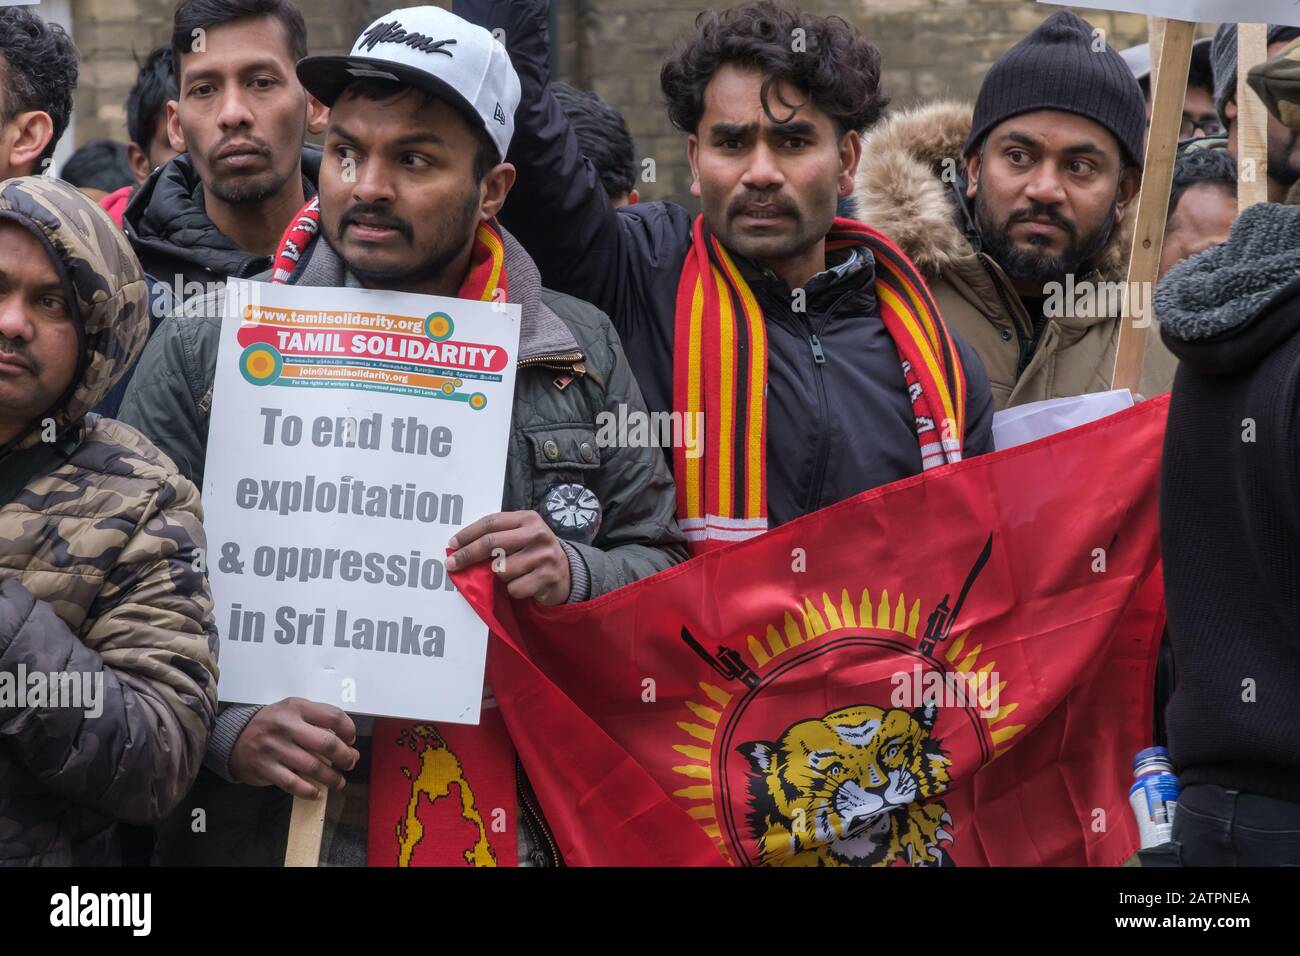 London, UK. 4th February 2020. Protesters with Tamil Eelam flag and scarf. Tamils protest at the Sri Lankan High Commission on Independence Day against the continued denial of the democratic and national rights of Tamils. Sri Lanka now admits the 20,000 Tamils 'disappeared' by the authorities in 2009 are dead and Tamils demand justice and information about their deaths. Credit: Peter Marshall/Alamy Live News Stock Photo